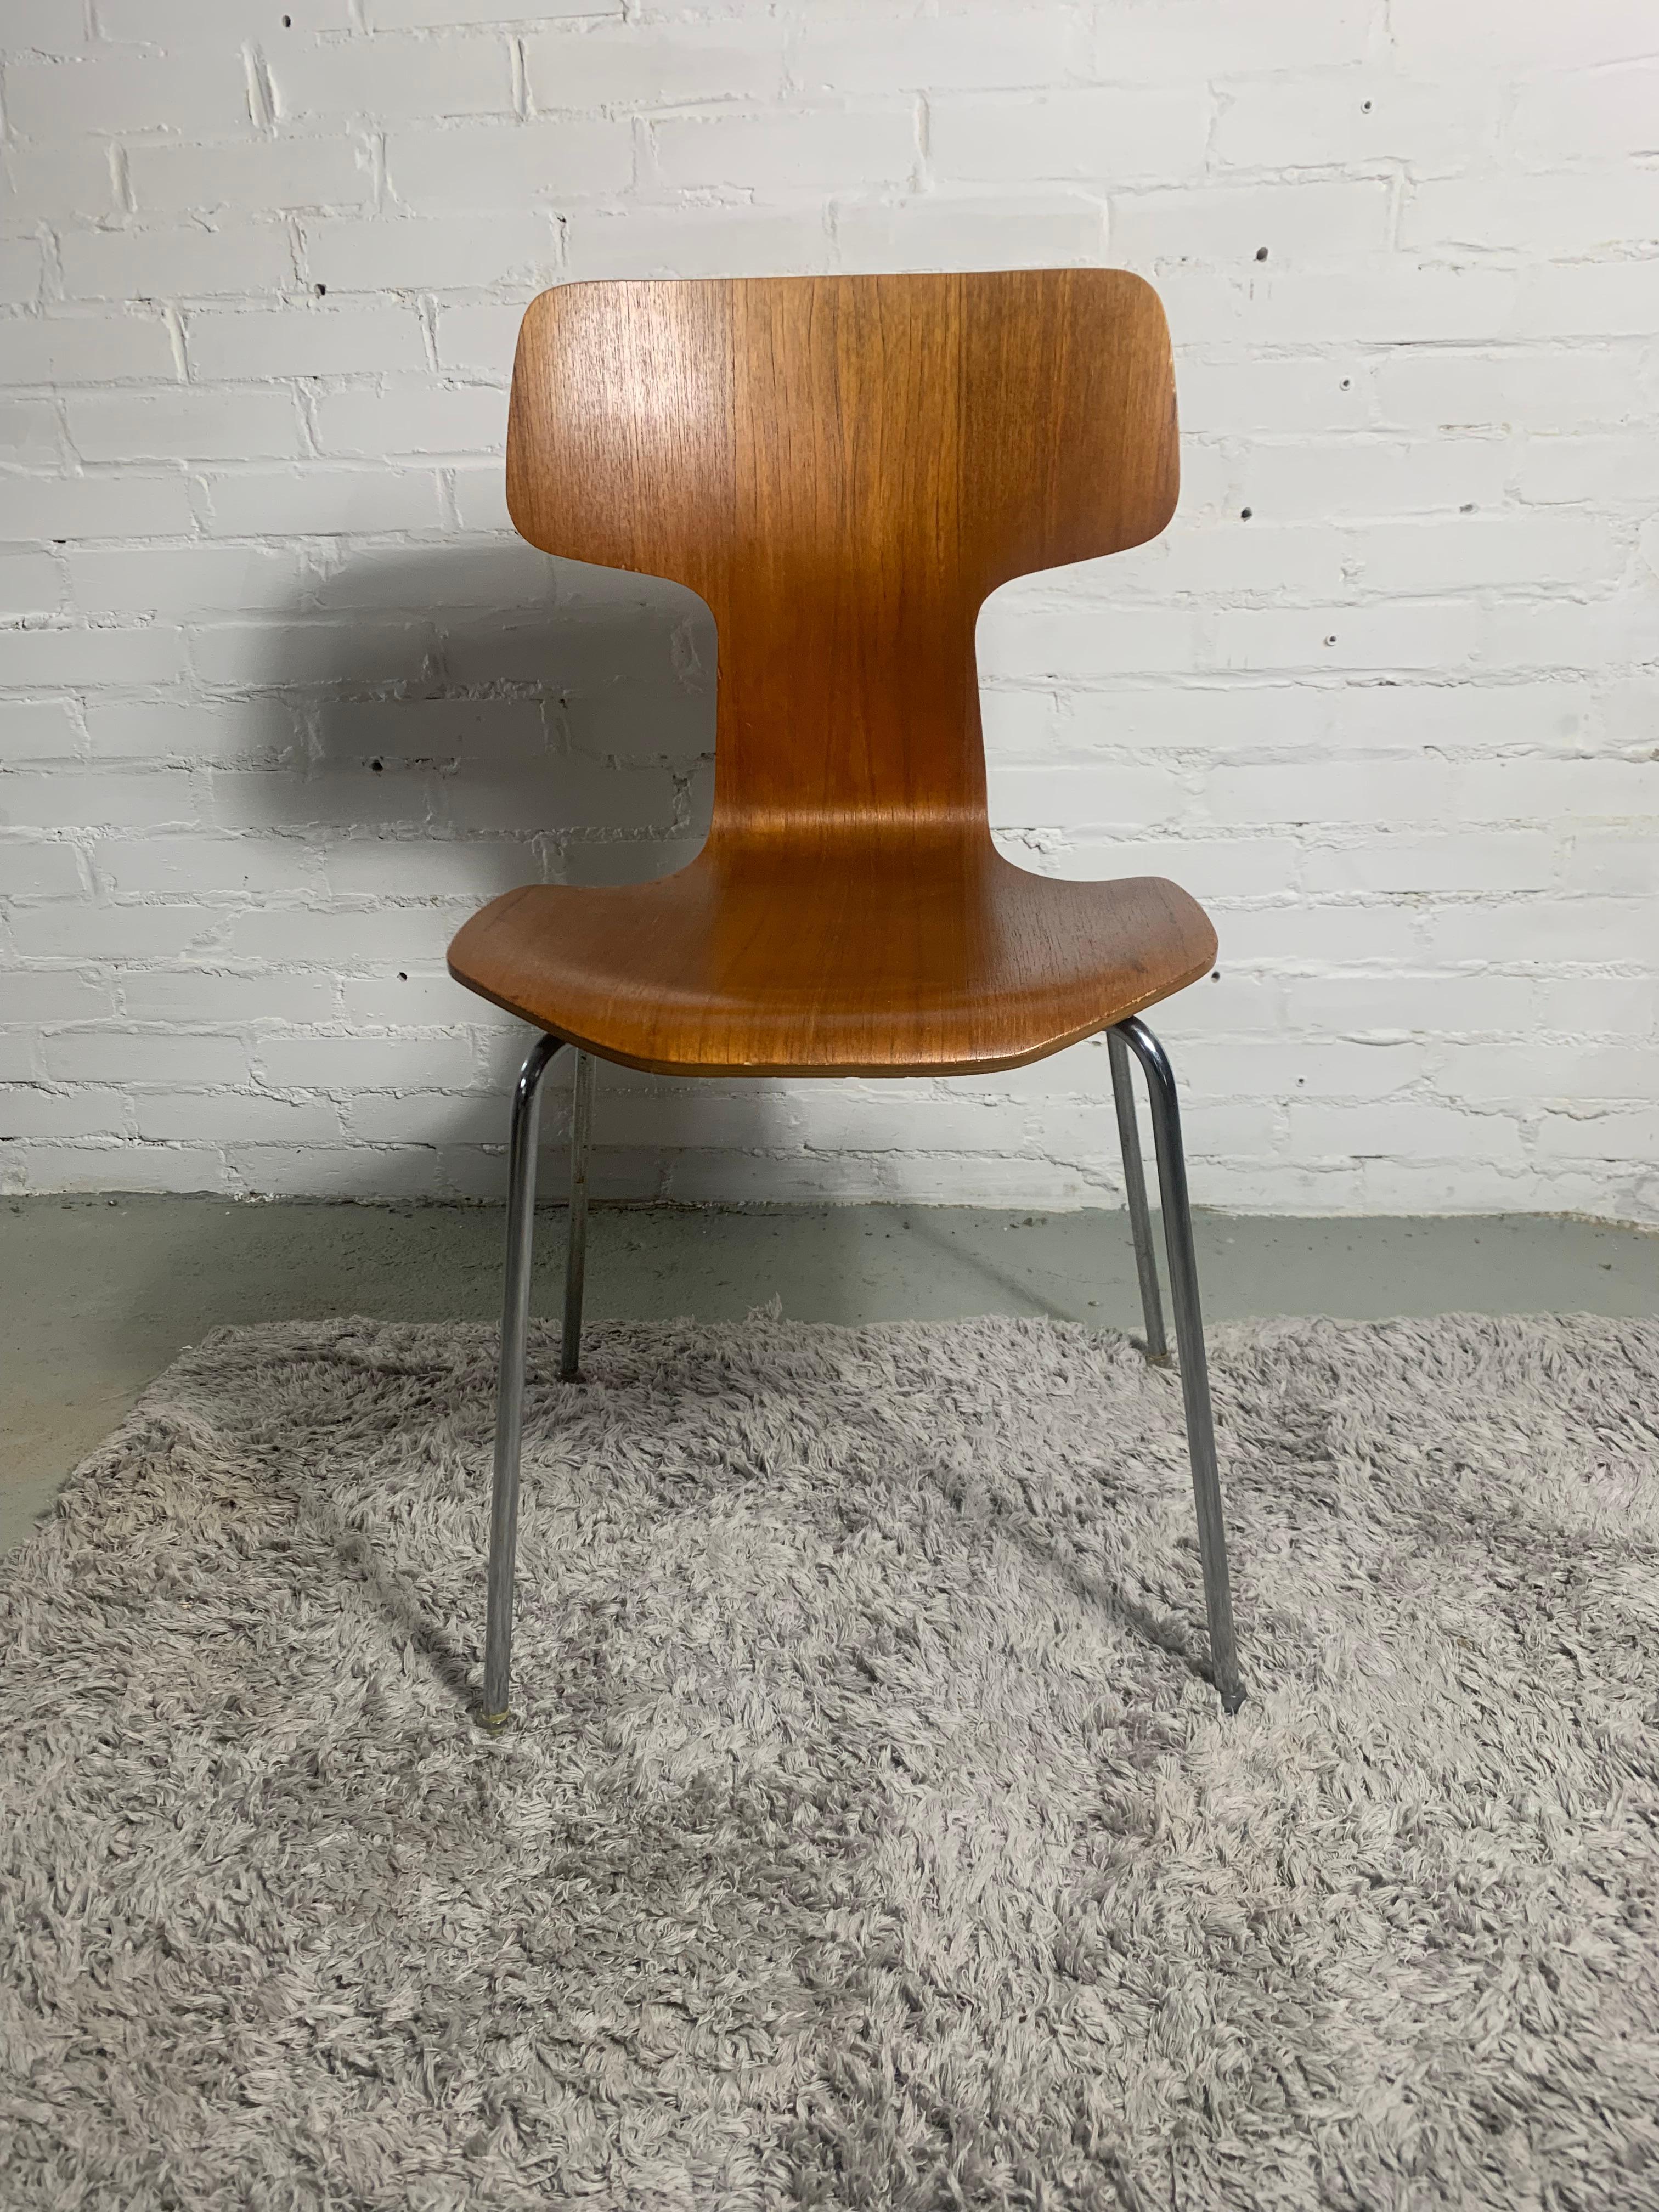 An iconic teak plywood ‘Hammer’ chair designed by Arne Jacobsen for Fritz Hansen in 1955. In very good original condition.